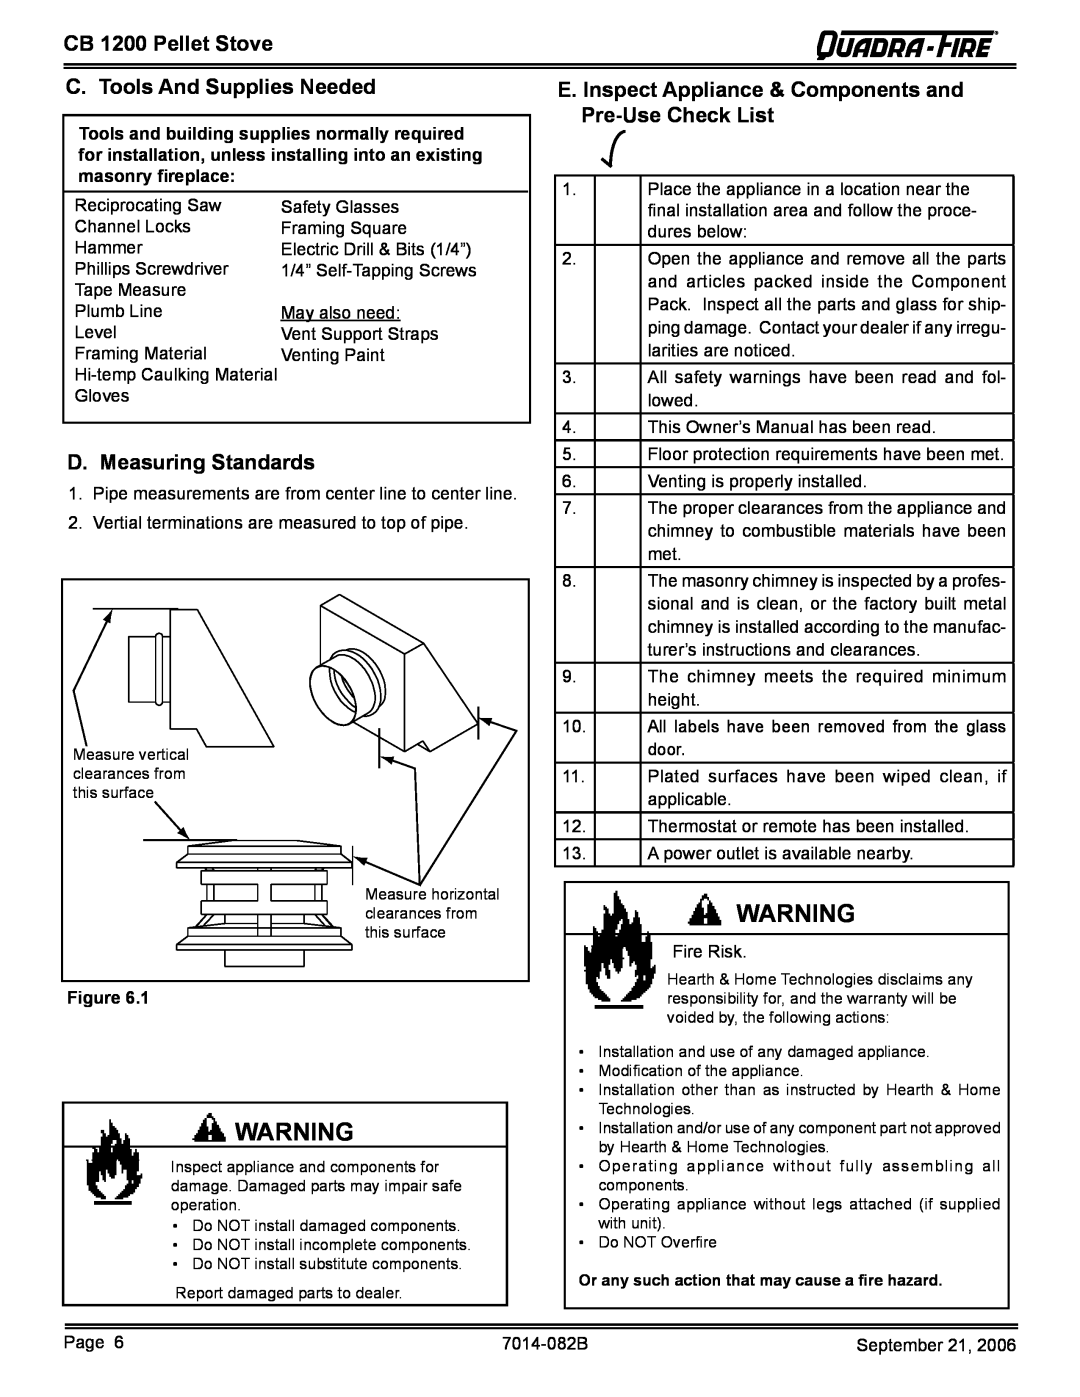 Quadra-Fire CB1200 owner manual C. Tools And Supplies Needed, D. Measuring Standards, CB 1200 Pellet Stove 